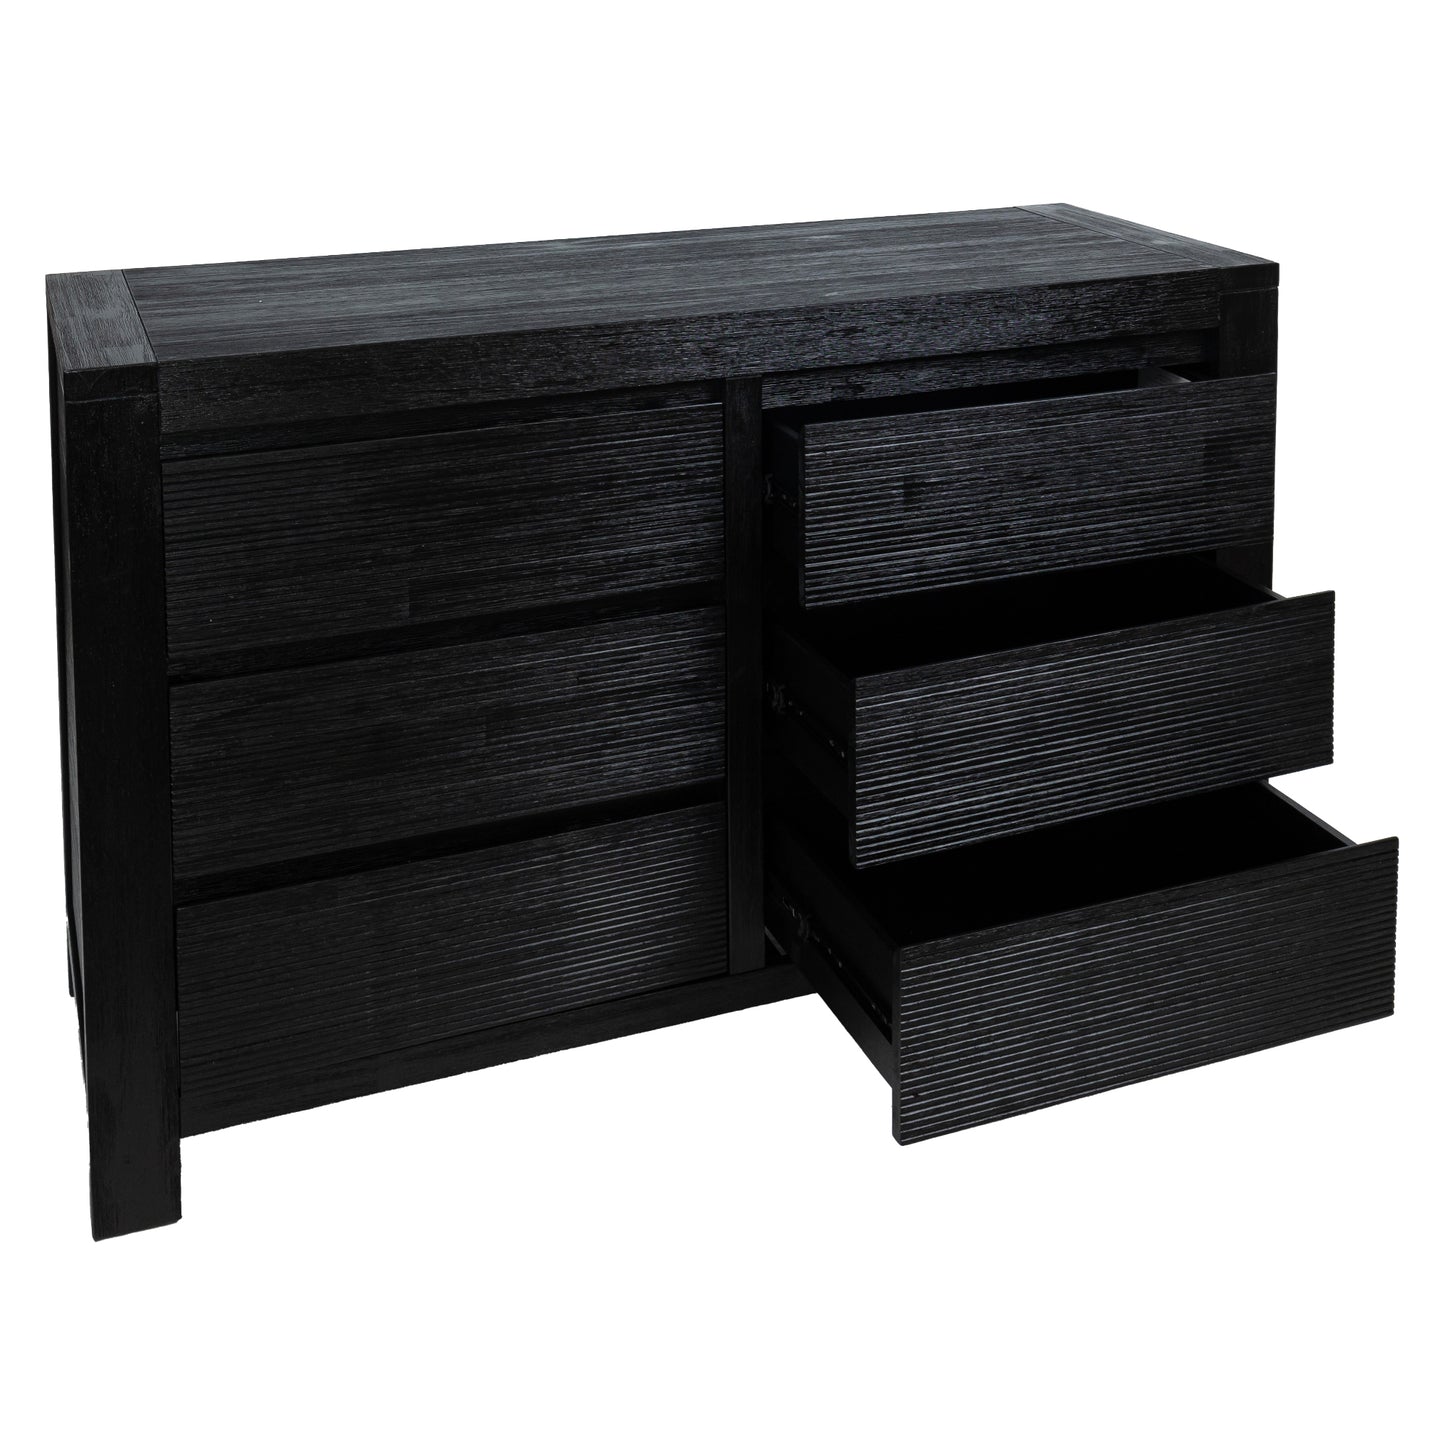 Tofino Solid Wood 6 Chest of Drawers - Black